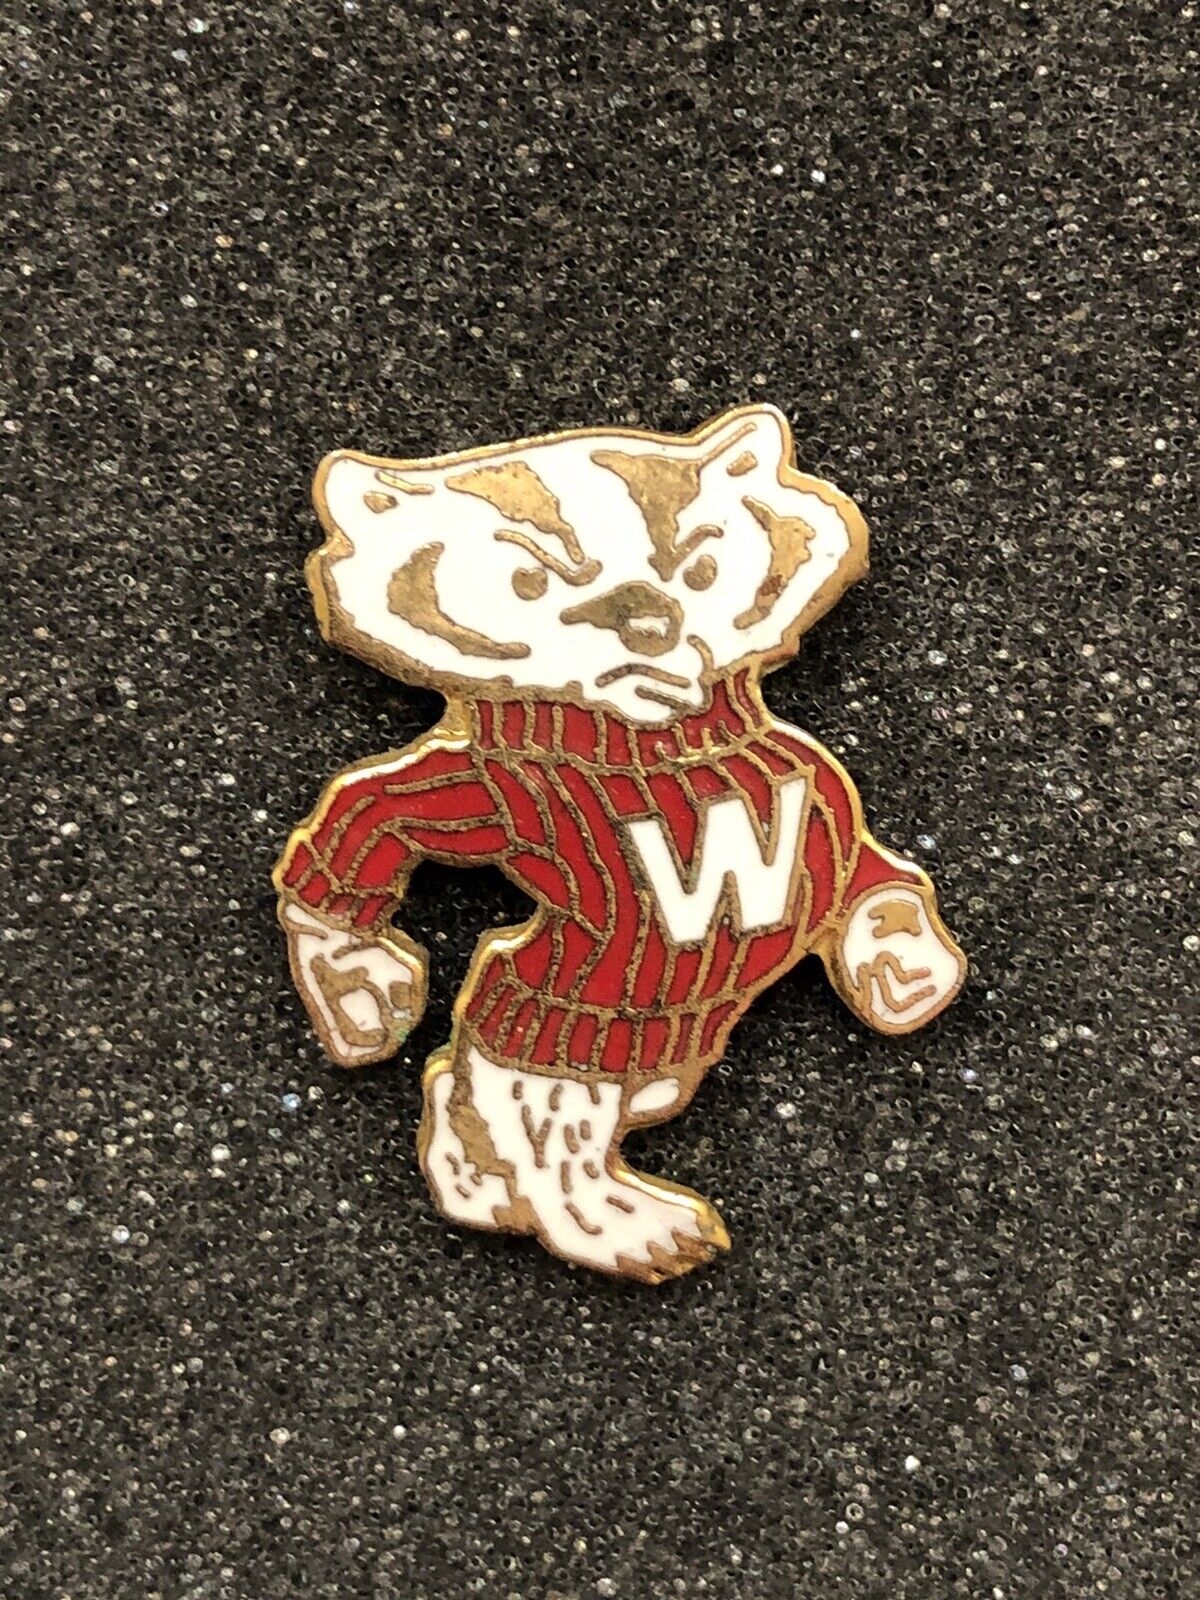 University of Wisconsin Bucky Badger Hat / Lapel Pin (Red/White/Gold)